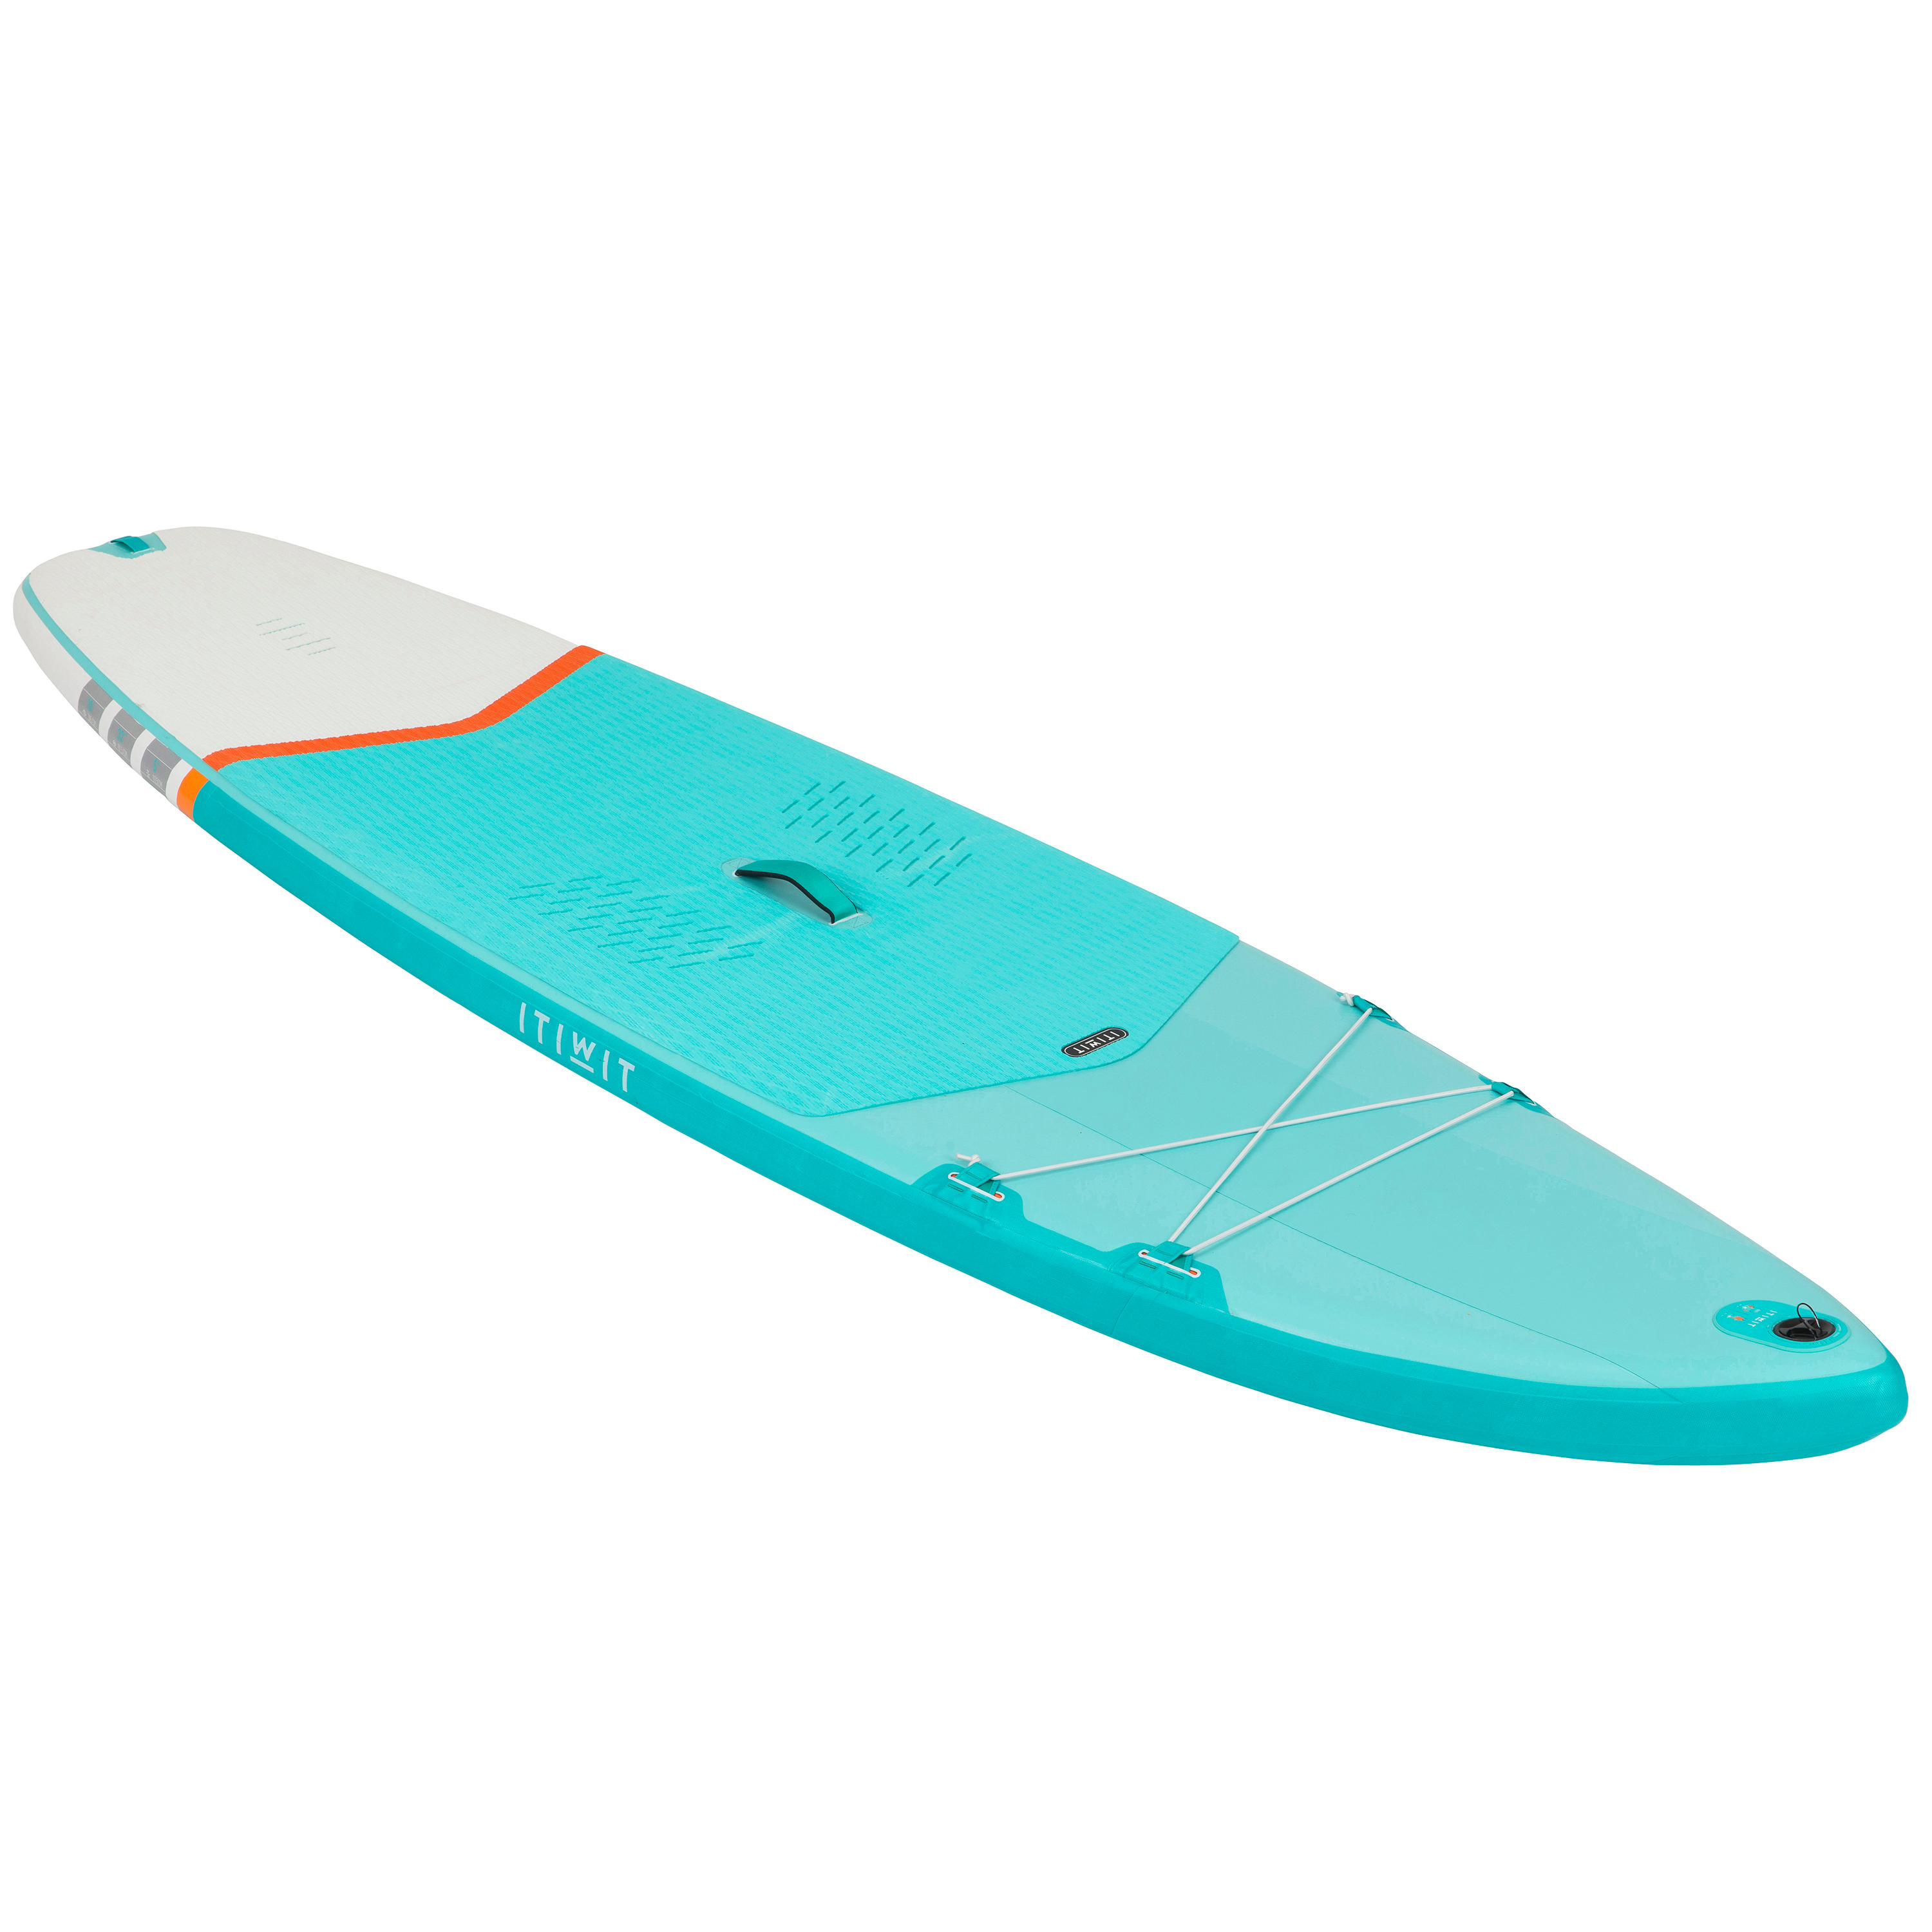 10’ Inflatable Paddle Board - X 100 Green - ITIWIT